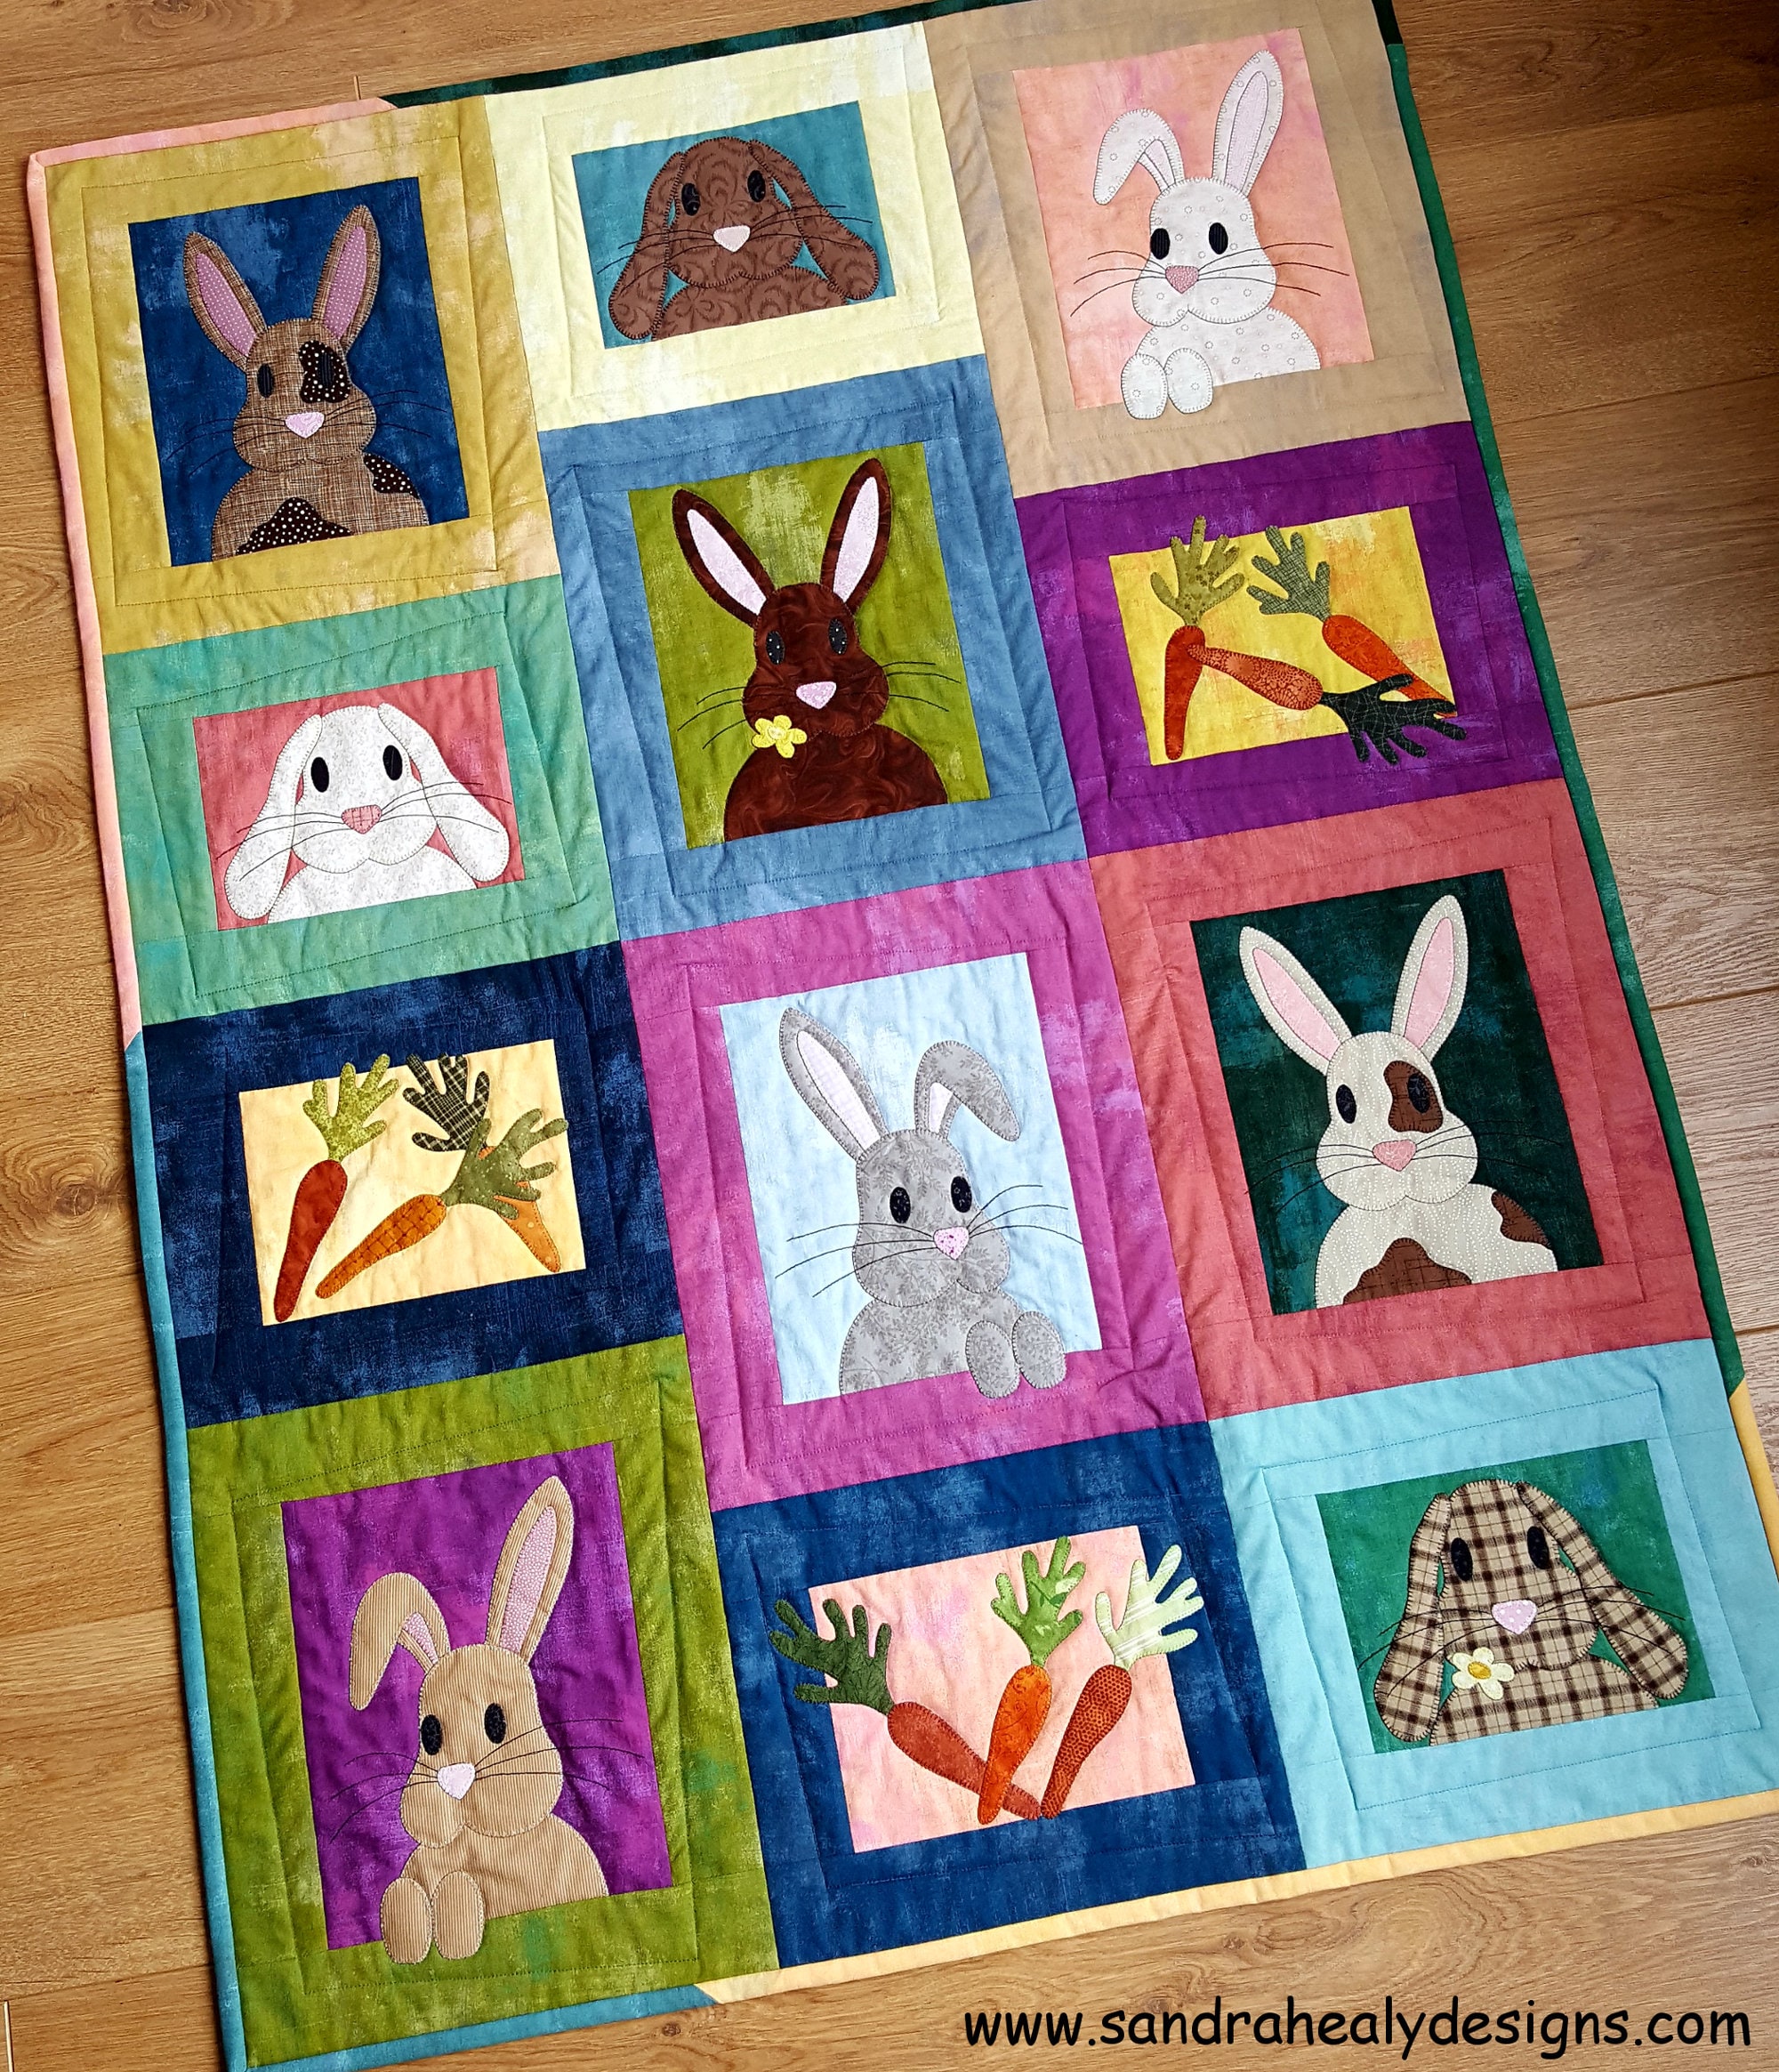 Bunny Baby Quilt Kit, Baby Quilt Kit, Bunny Rabbits Carrots, Easter, Boy or  Girl, Gender Neutral, Cotton Fabric, Crib Diy, Easy Panel Kit 